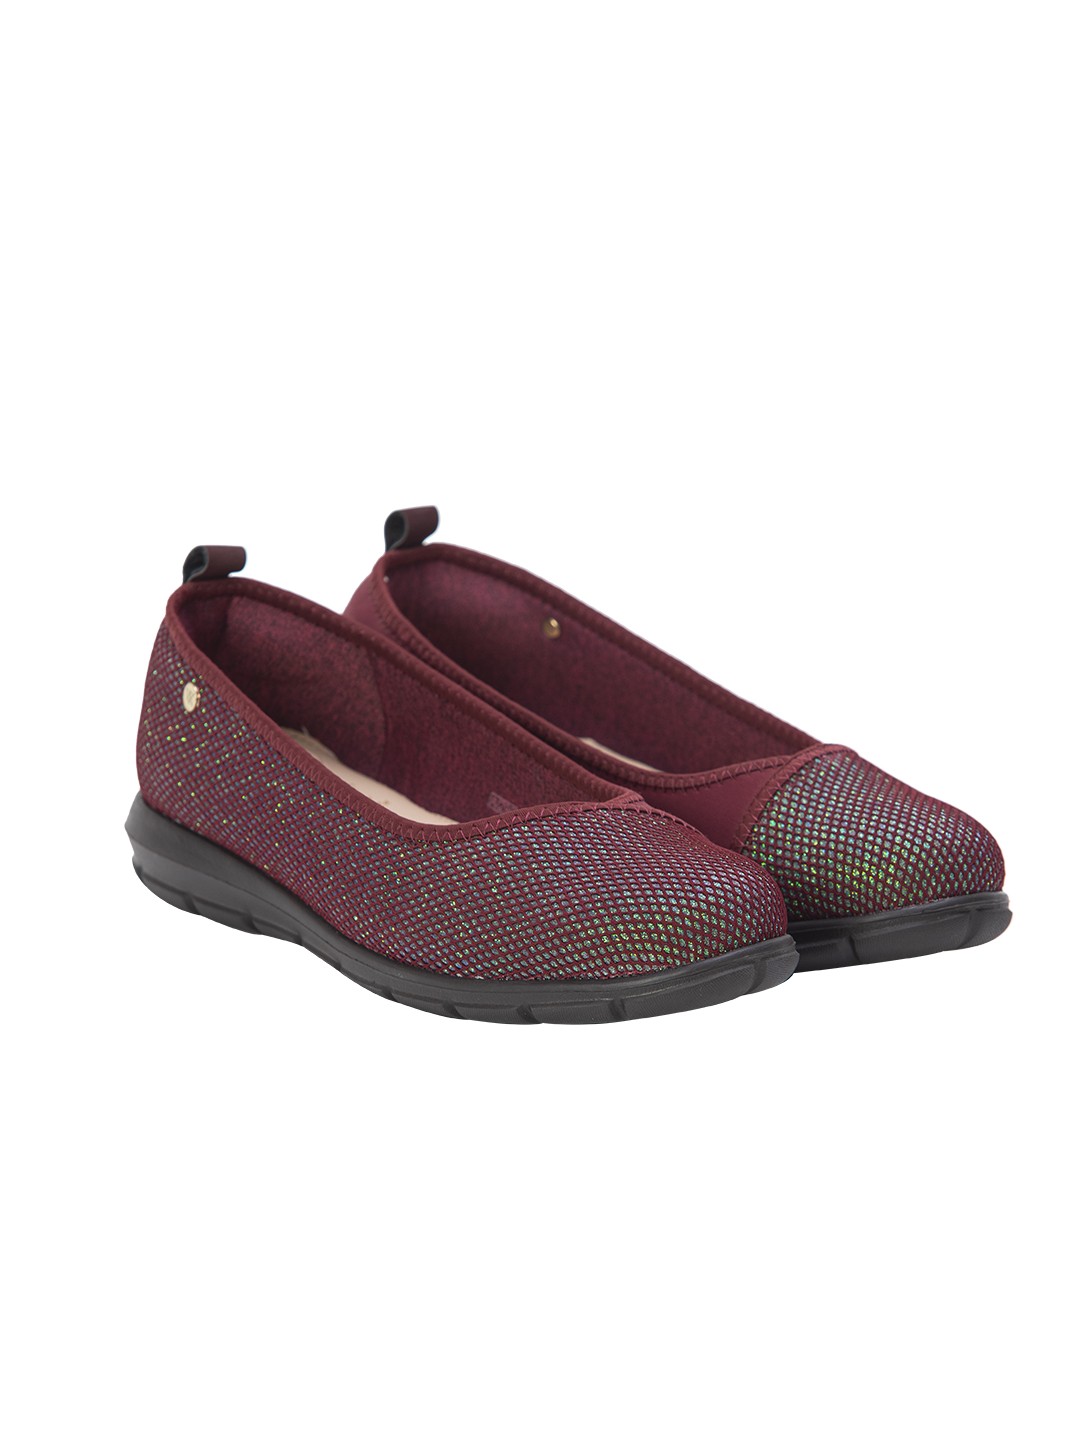 Buy Von Wellx Germany Comfort Pace Mehroon Casual Shoes Online in Chandigarh